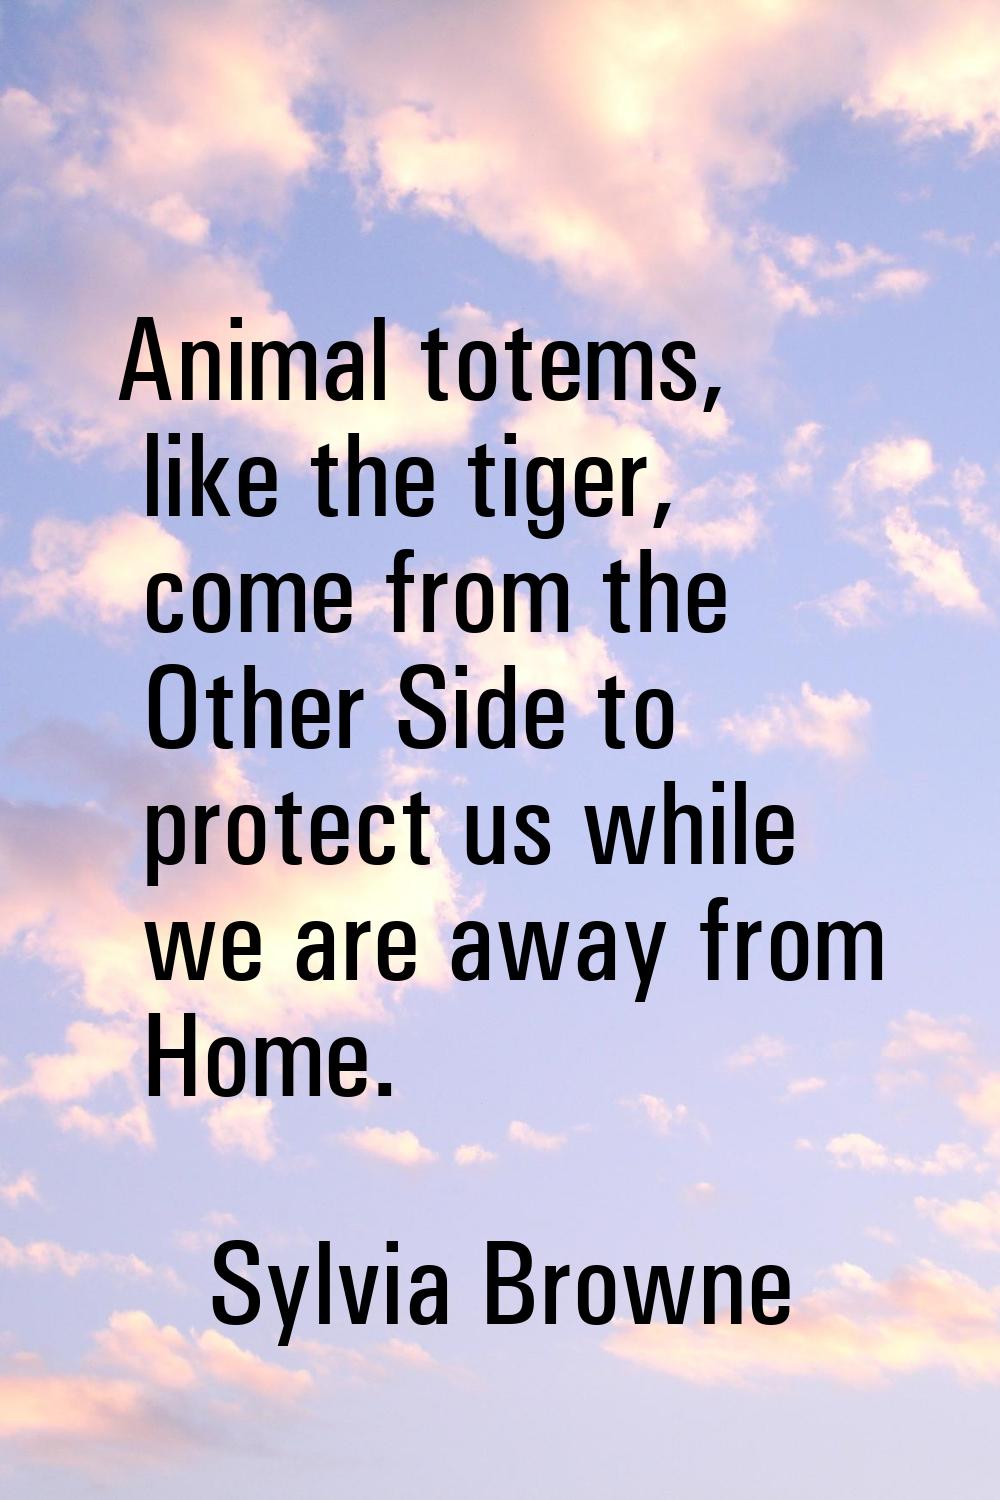 Animal totems, like the tiger, come from the Other Side to protect us while we are away from Home.